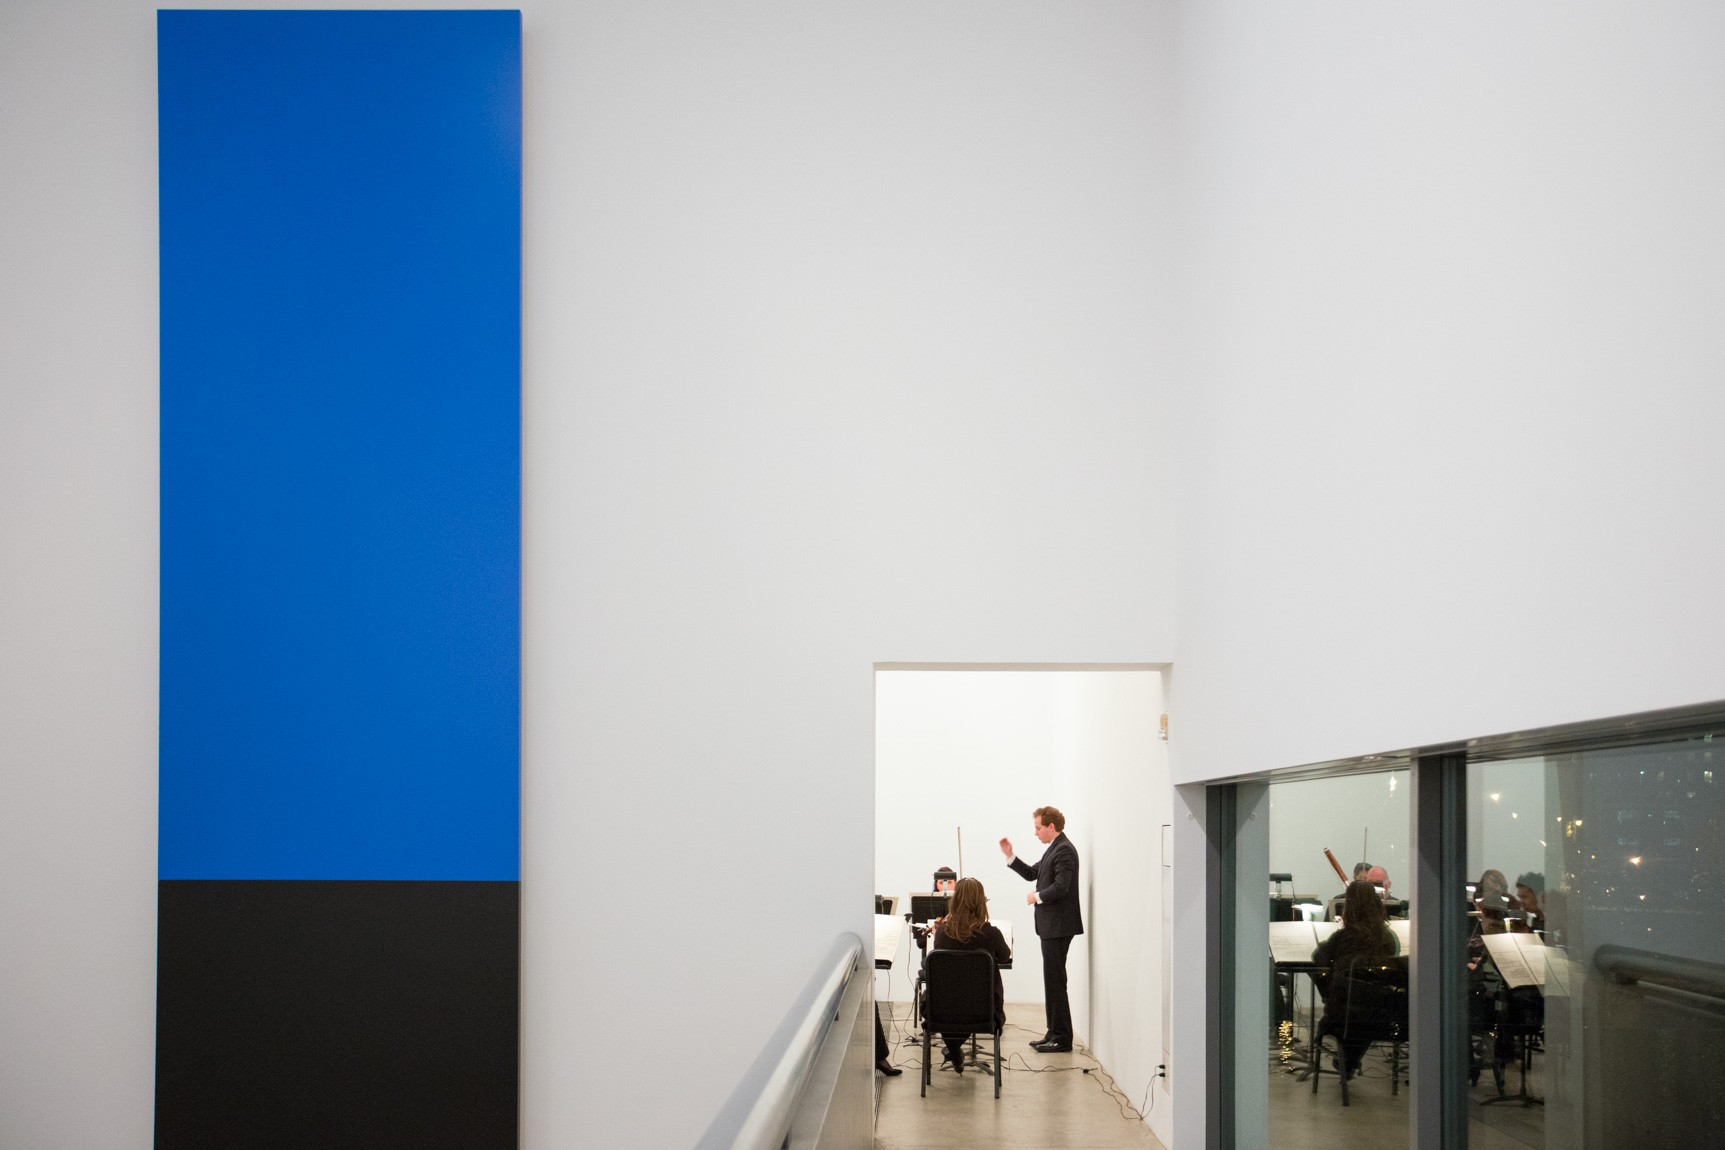 A view of the conductor and ensemble performing in the Cube Gallery, with Kelly's "Blue Black" on the left.